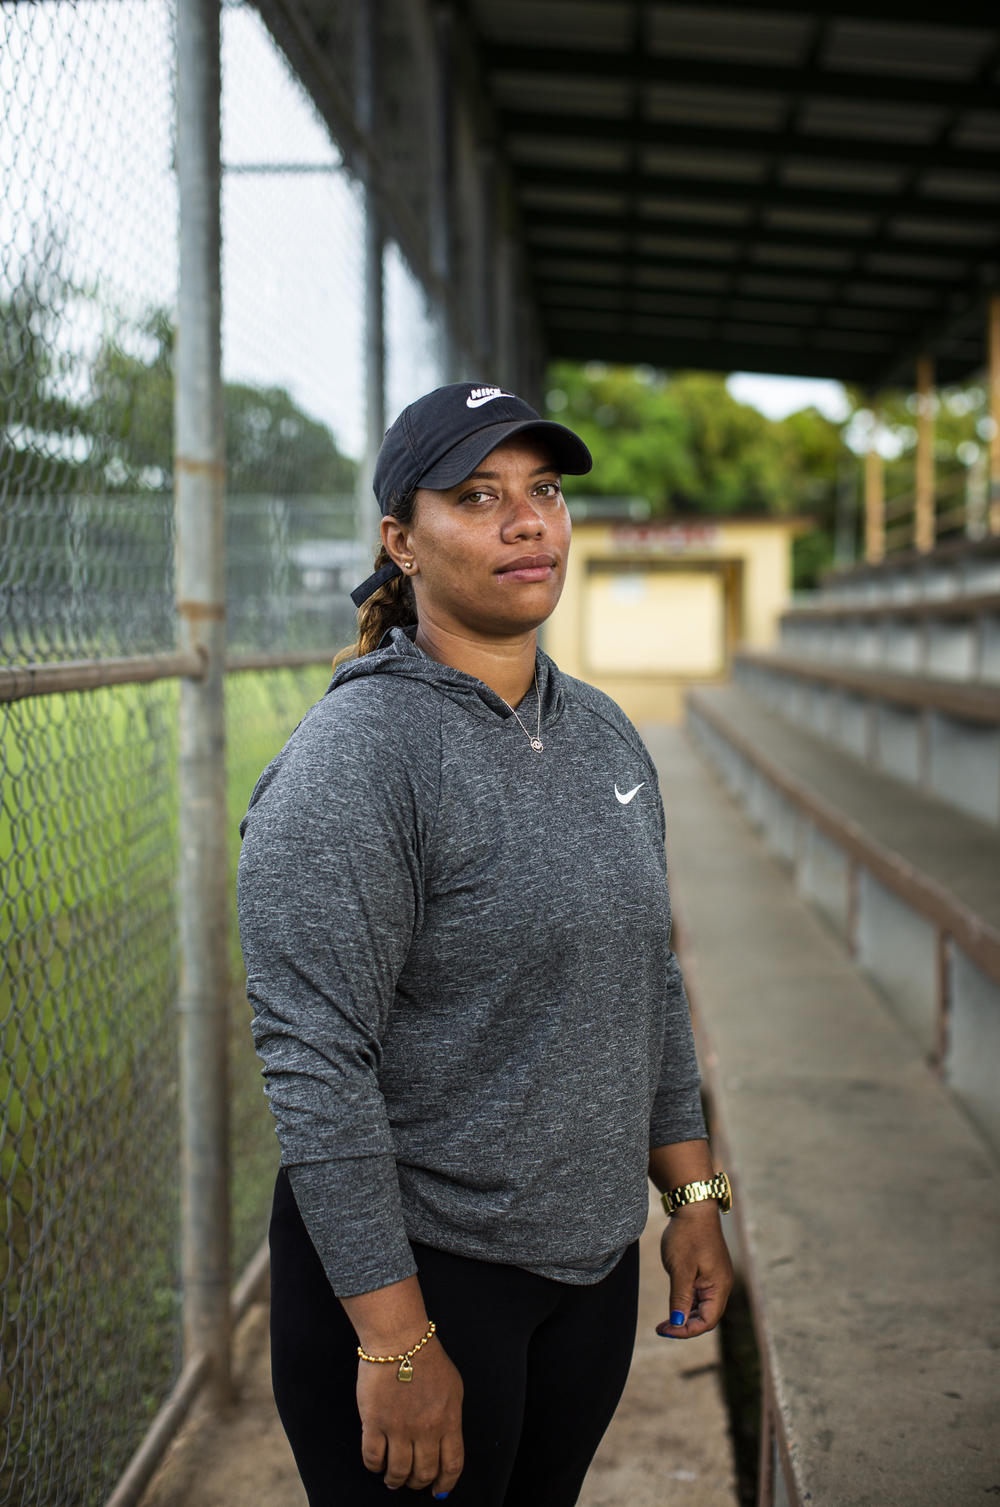 Normangeline Vázquez, the recreation director for the town of Lajas, had started coaching softball and baseball on the newly restored field. Recreational facilities are crucial community resources, she said, but across Puerto Rico many have yet to be repaired five years after Hurricane Maria.